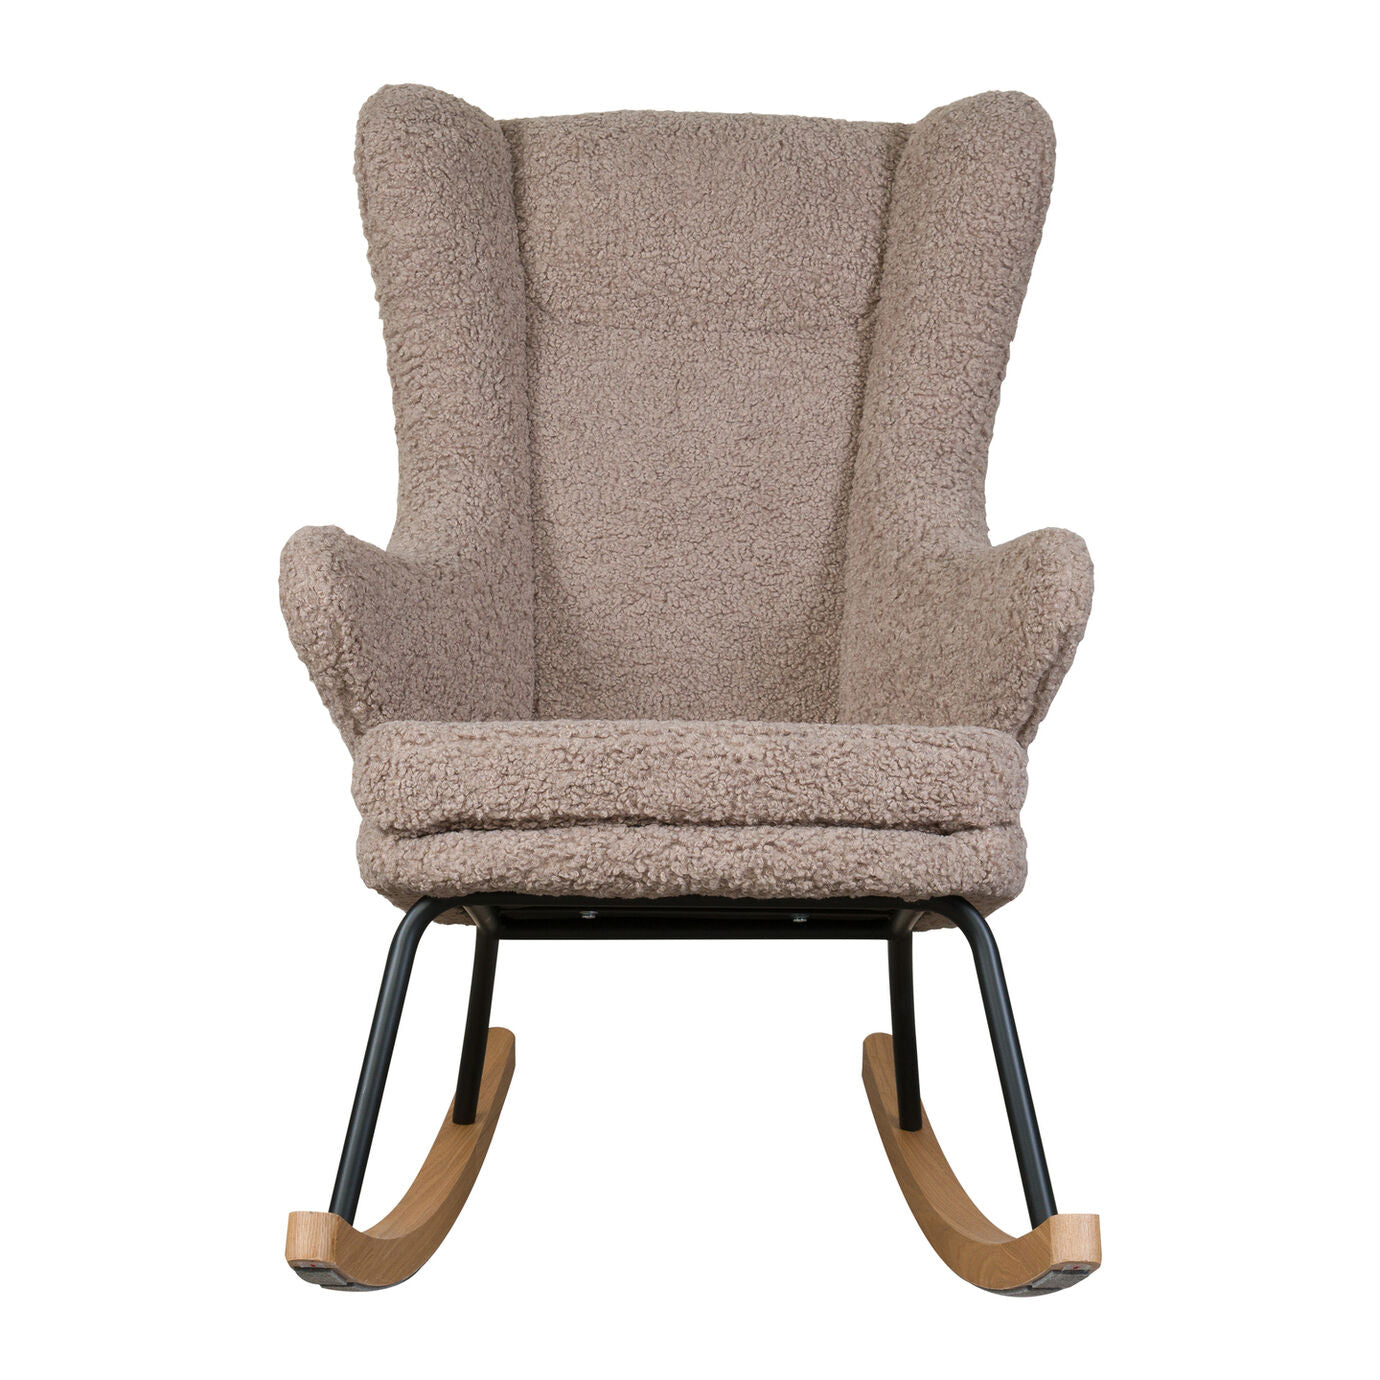 Quax - Rocking Adult Chair De Luxe - Stone